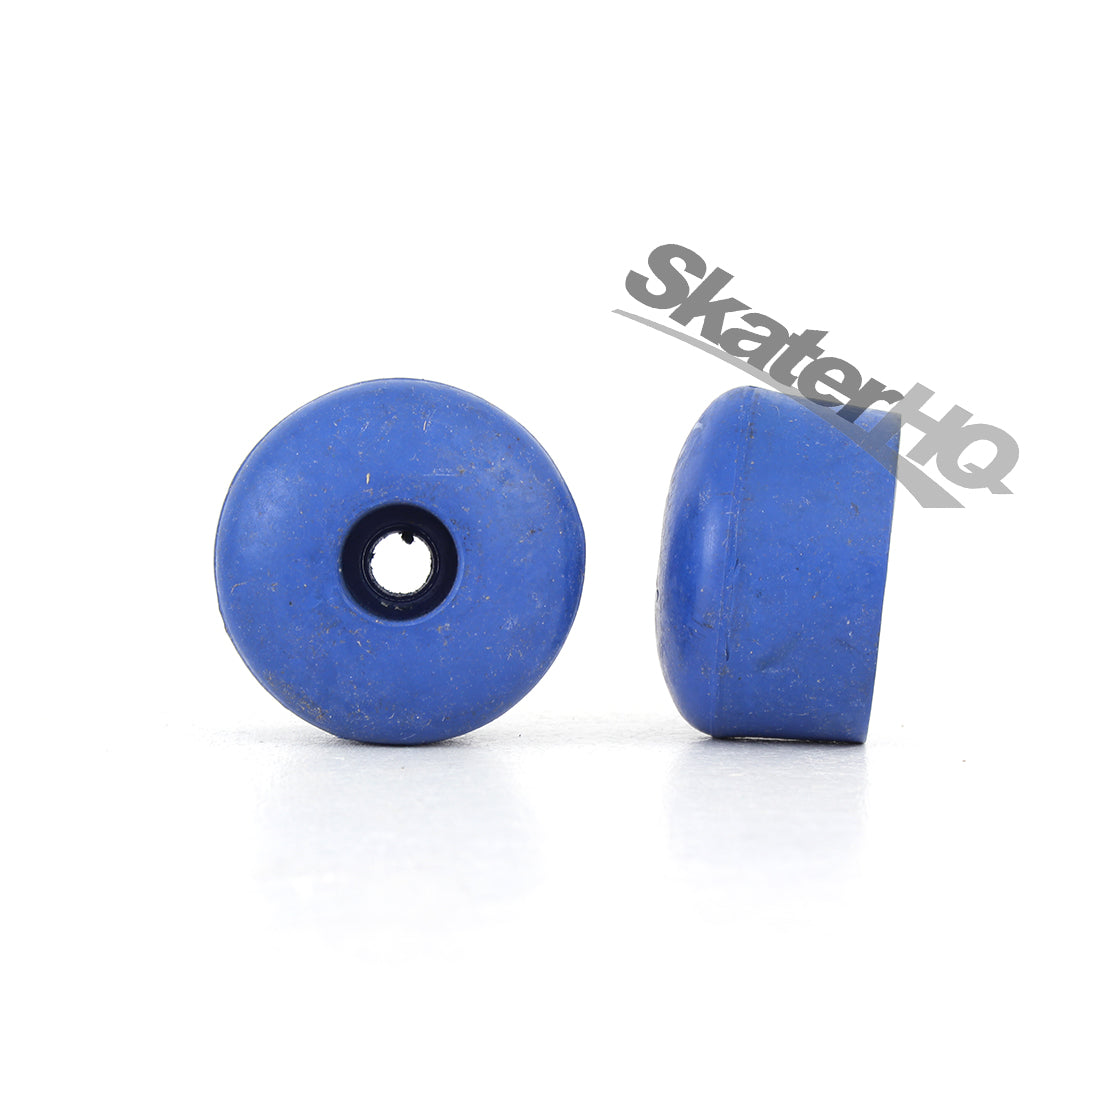 Sure-Grip Dance Toe Stops Small PAIR - Blue Roller Skate Hardware and Parts